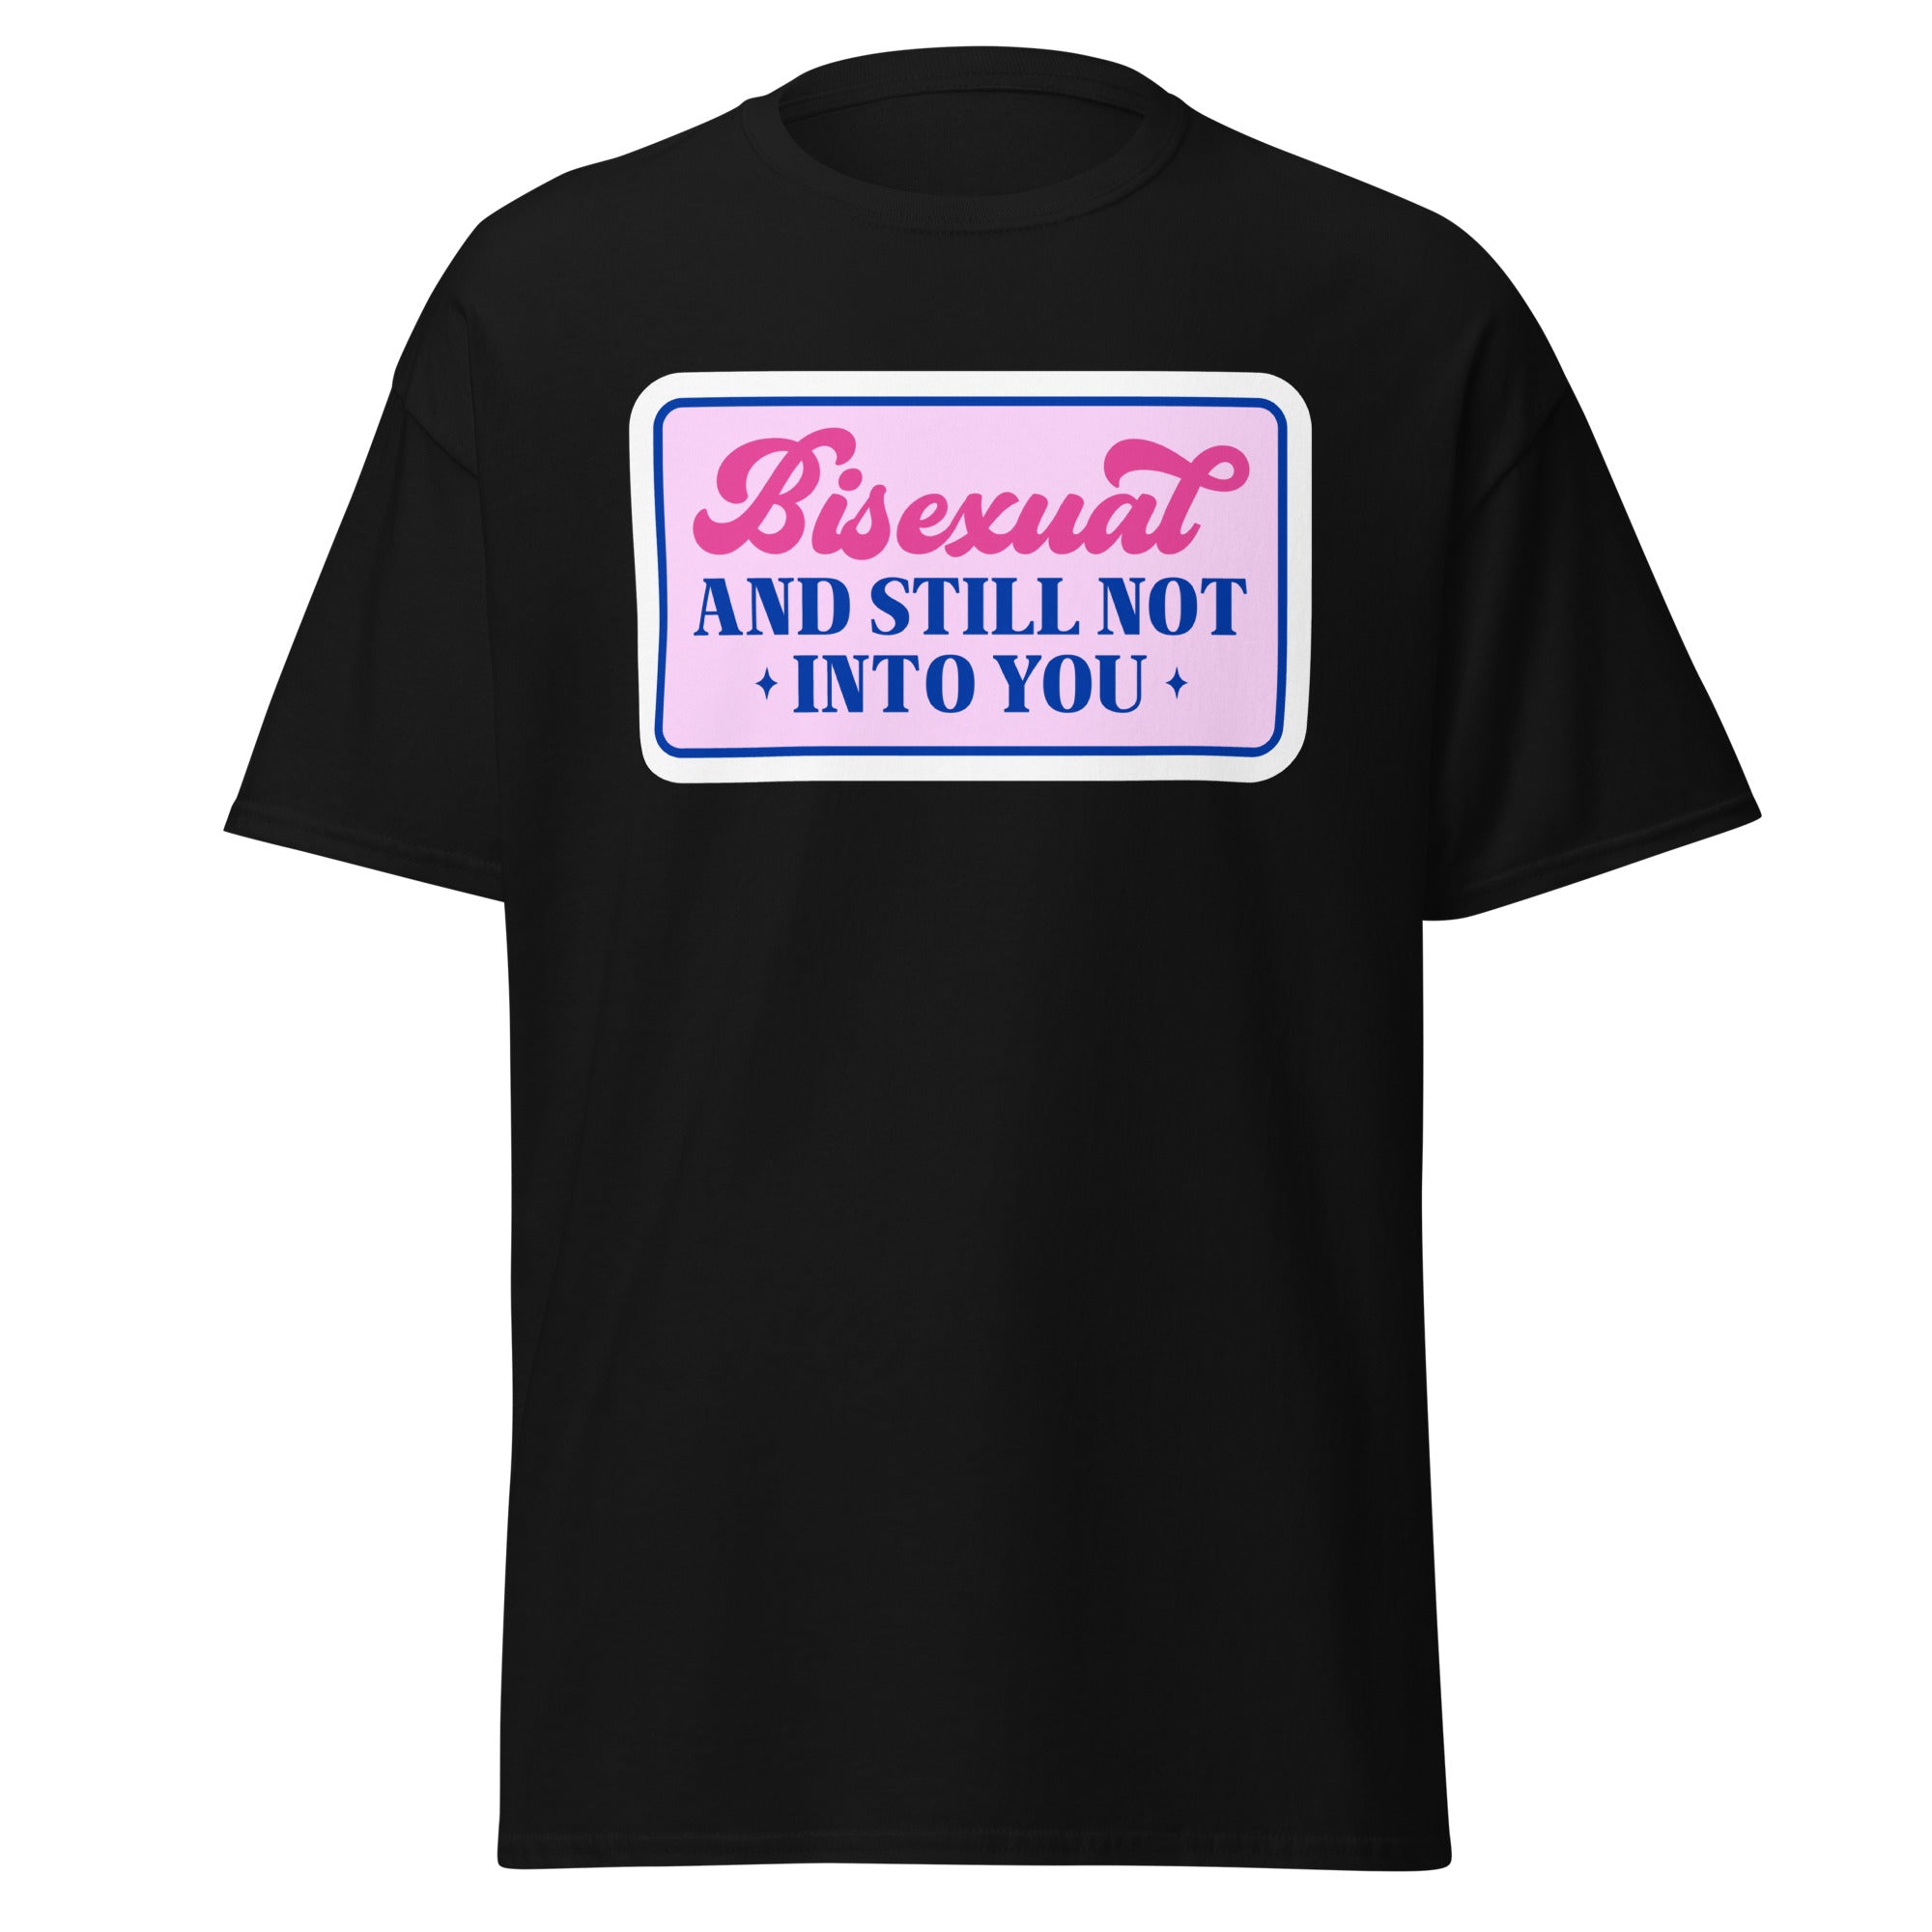 Bisexual AND STILL NOT INTO YOU Unisex T Shirt